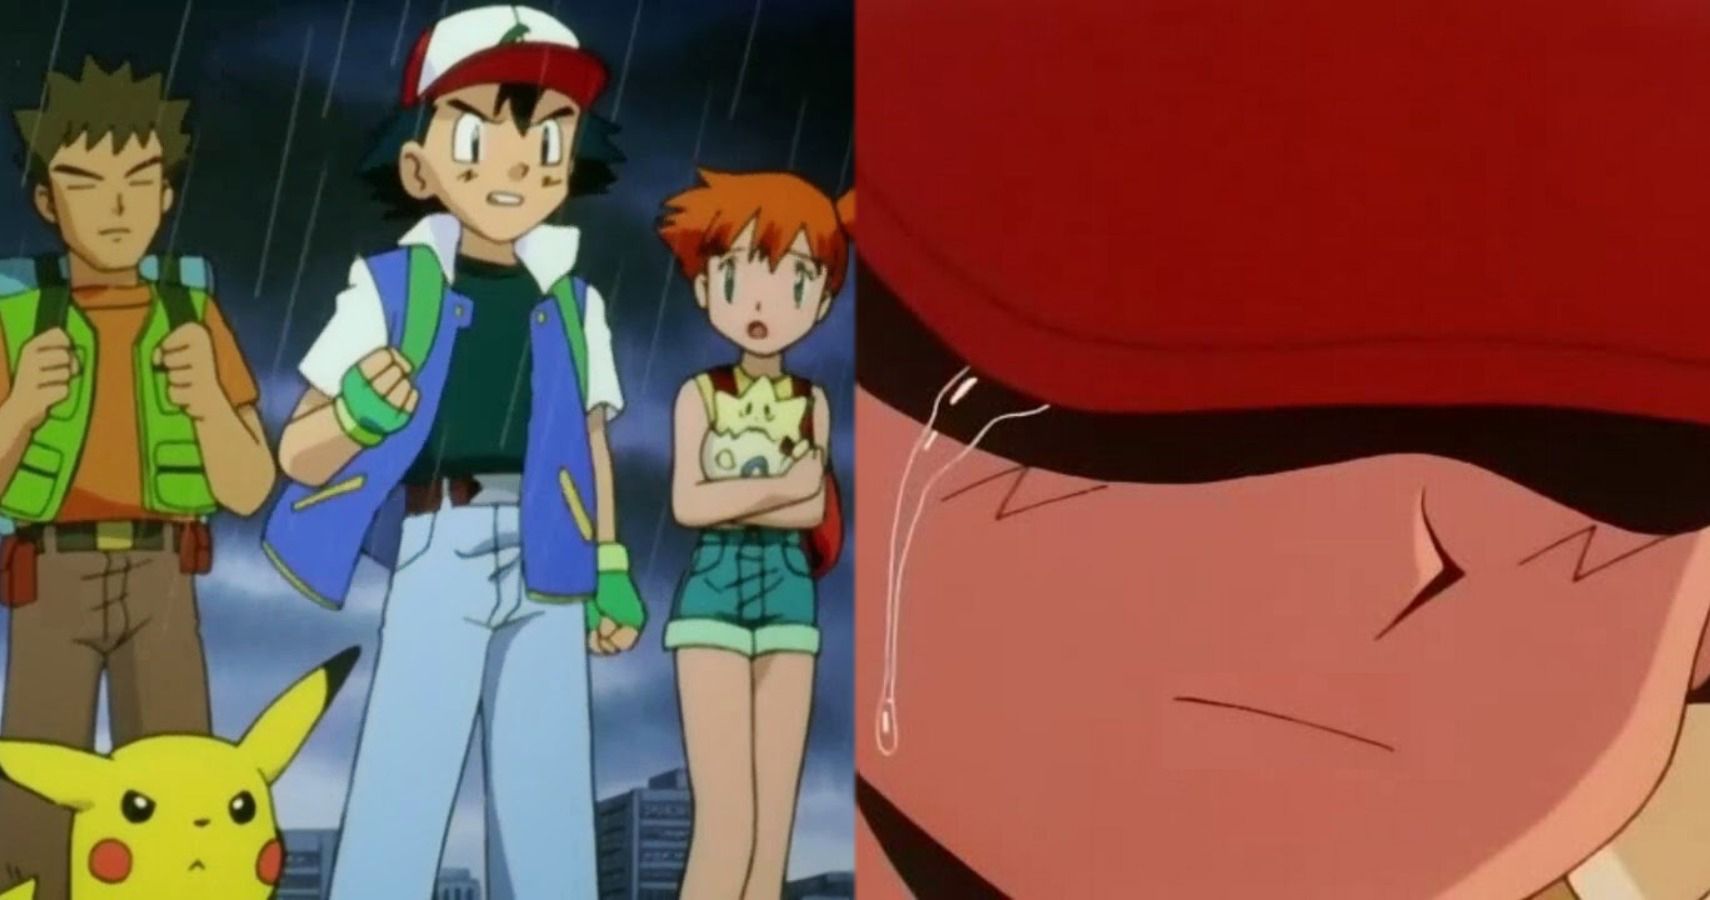 The adventures of Ash Ketchum, Pikachu are ending in Pokémon anime